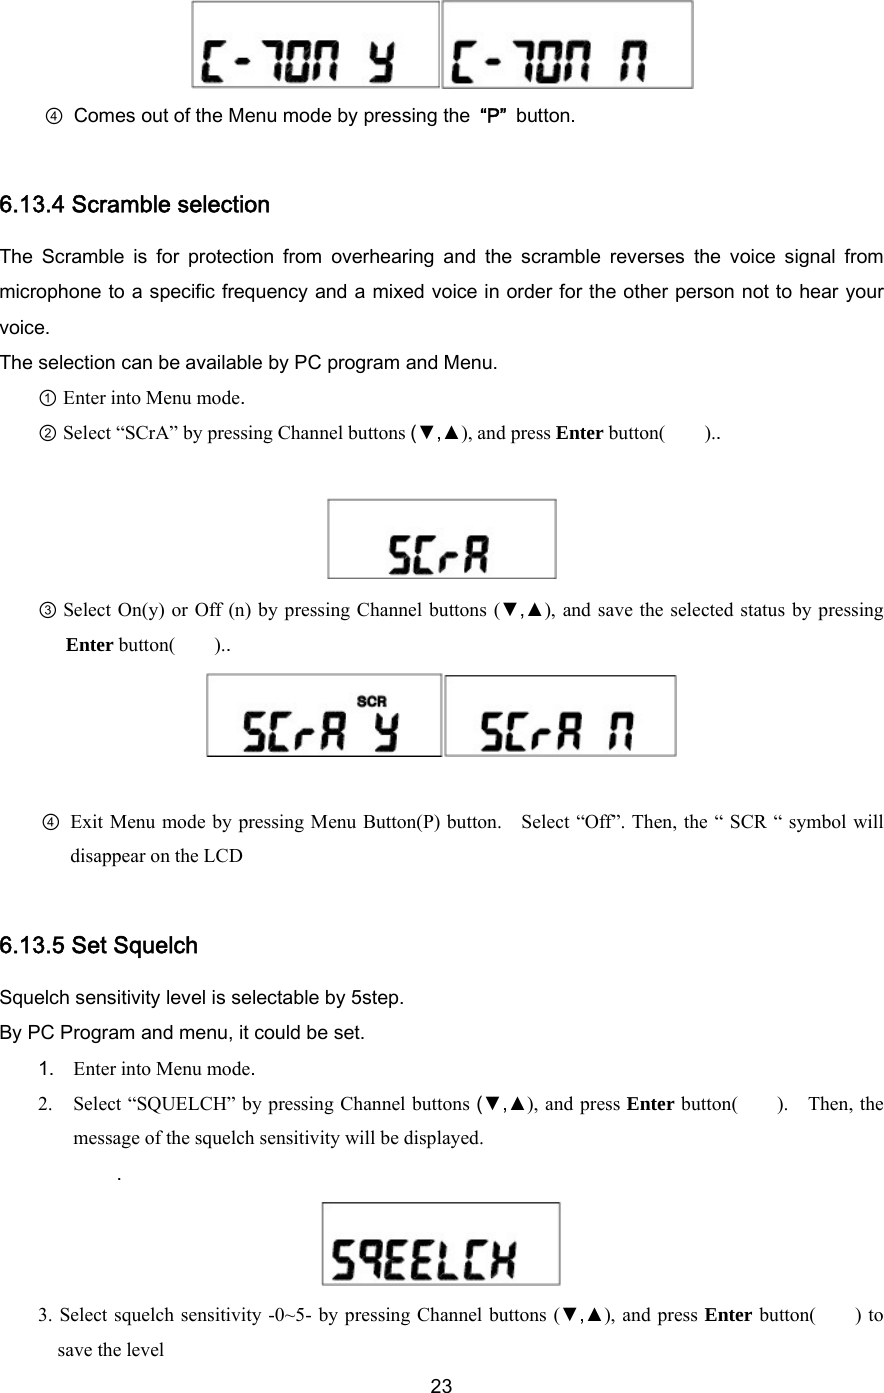  23 ④  Comes out of the Menu mode by pressing the “P” button.  6.13.4 Scramble selection The  Scramble  is  for  protection  from  overhearing  and  the  scramble  reverses  the  voice  signal  from microphone to a specific frequency and a mixed voice in order for the other person not to hear your voice. The selection can be available by PC program and Menu.   ① Enter into Menu mode. ② Select “SCrA” by pressing Channel buttons (▼,▲), and press Enter button(    )..   ③ Select On(y) or Off (n) by pressing Channel buttons (▼,▲), and save the selected status by pressing Enter button(    )..   ④  Exit Menu mode by pressing Menu Button(P) button.    Select “Off”. Then, the “ SCR “ symbol will disappear on the LCD  6.13.5 Set Squelch   Squelch sensitivity level is selectable by 5step. By PC Program and menu, it could be set. 1. Enter into Menu mode. 2. Select “SQUELCH” by pressing Channel buttons (▼,▲), and press Enter button(    ).  Then, the message of the squelch sensitivity will be displayed.   .  3. Select squelch sensitivity -0~5- by pressing Channel buttons (▼,▲), and press Enter button(    ) to save the level 